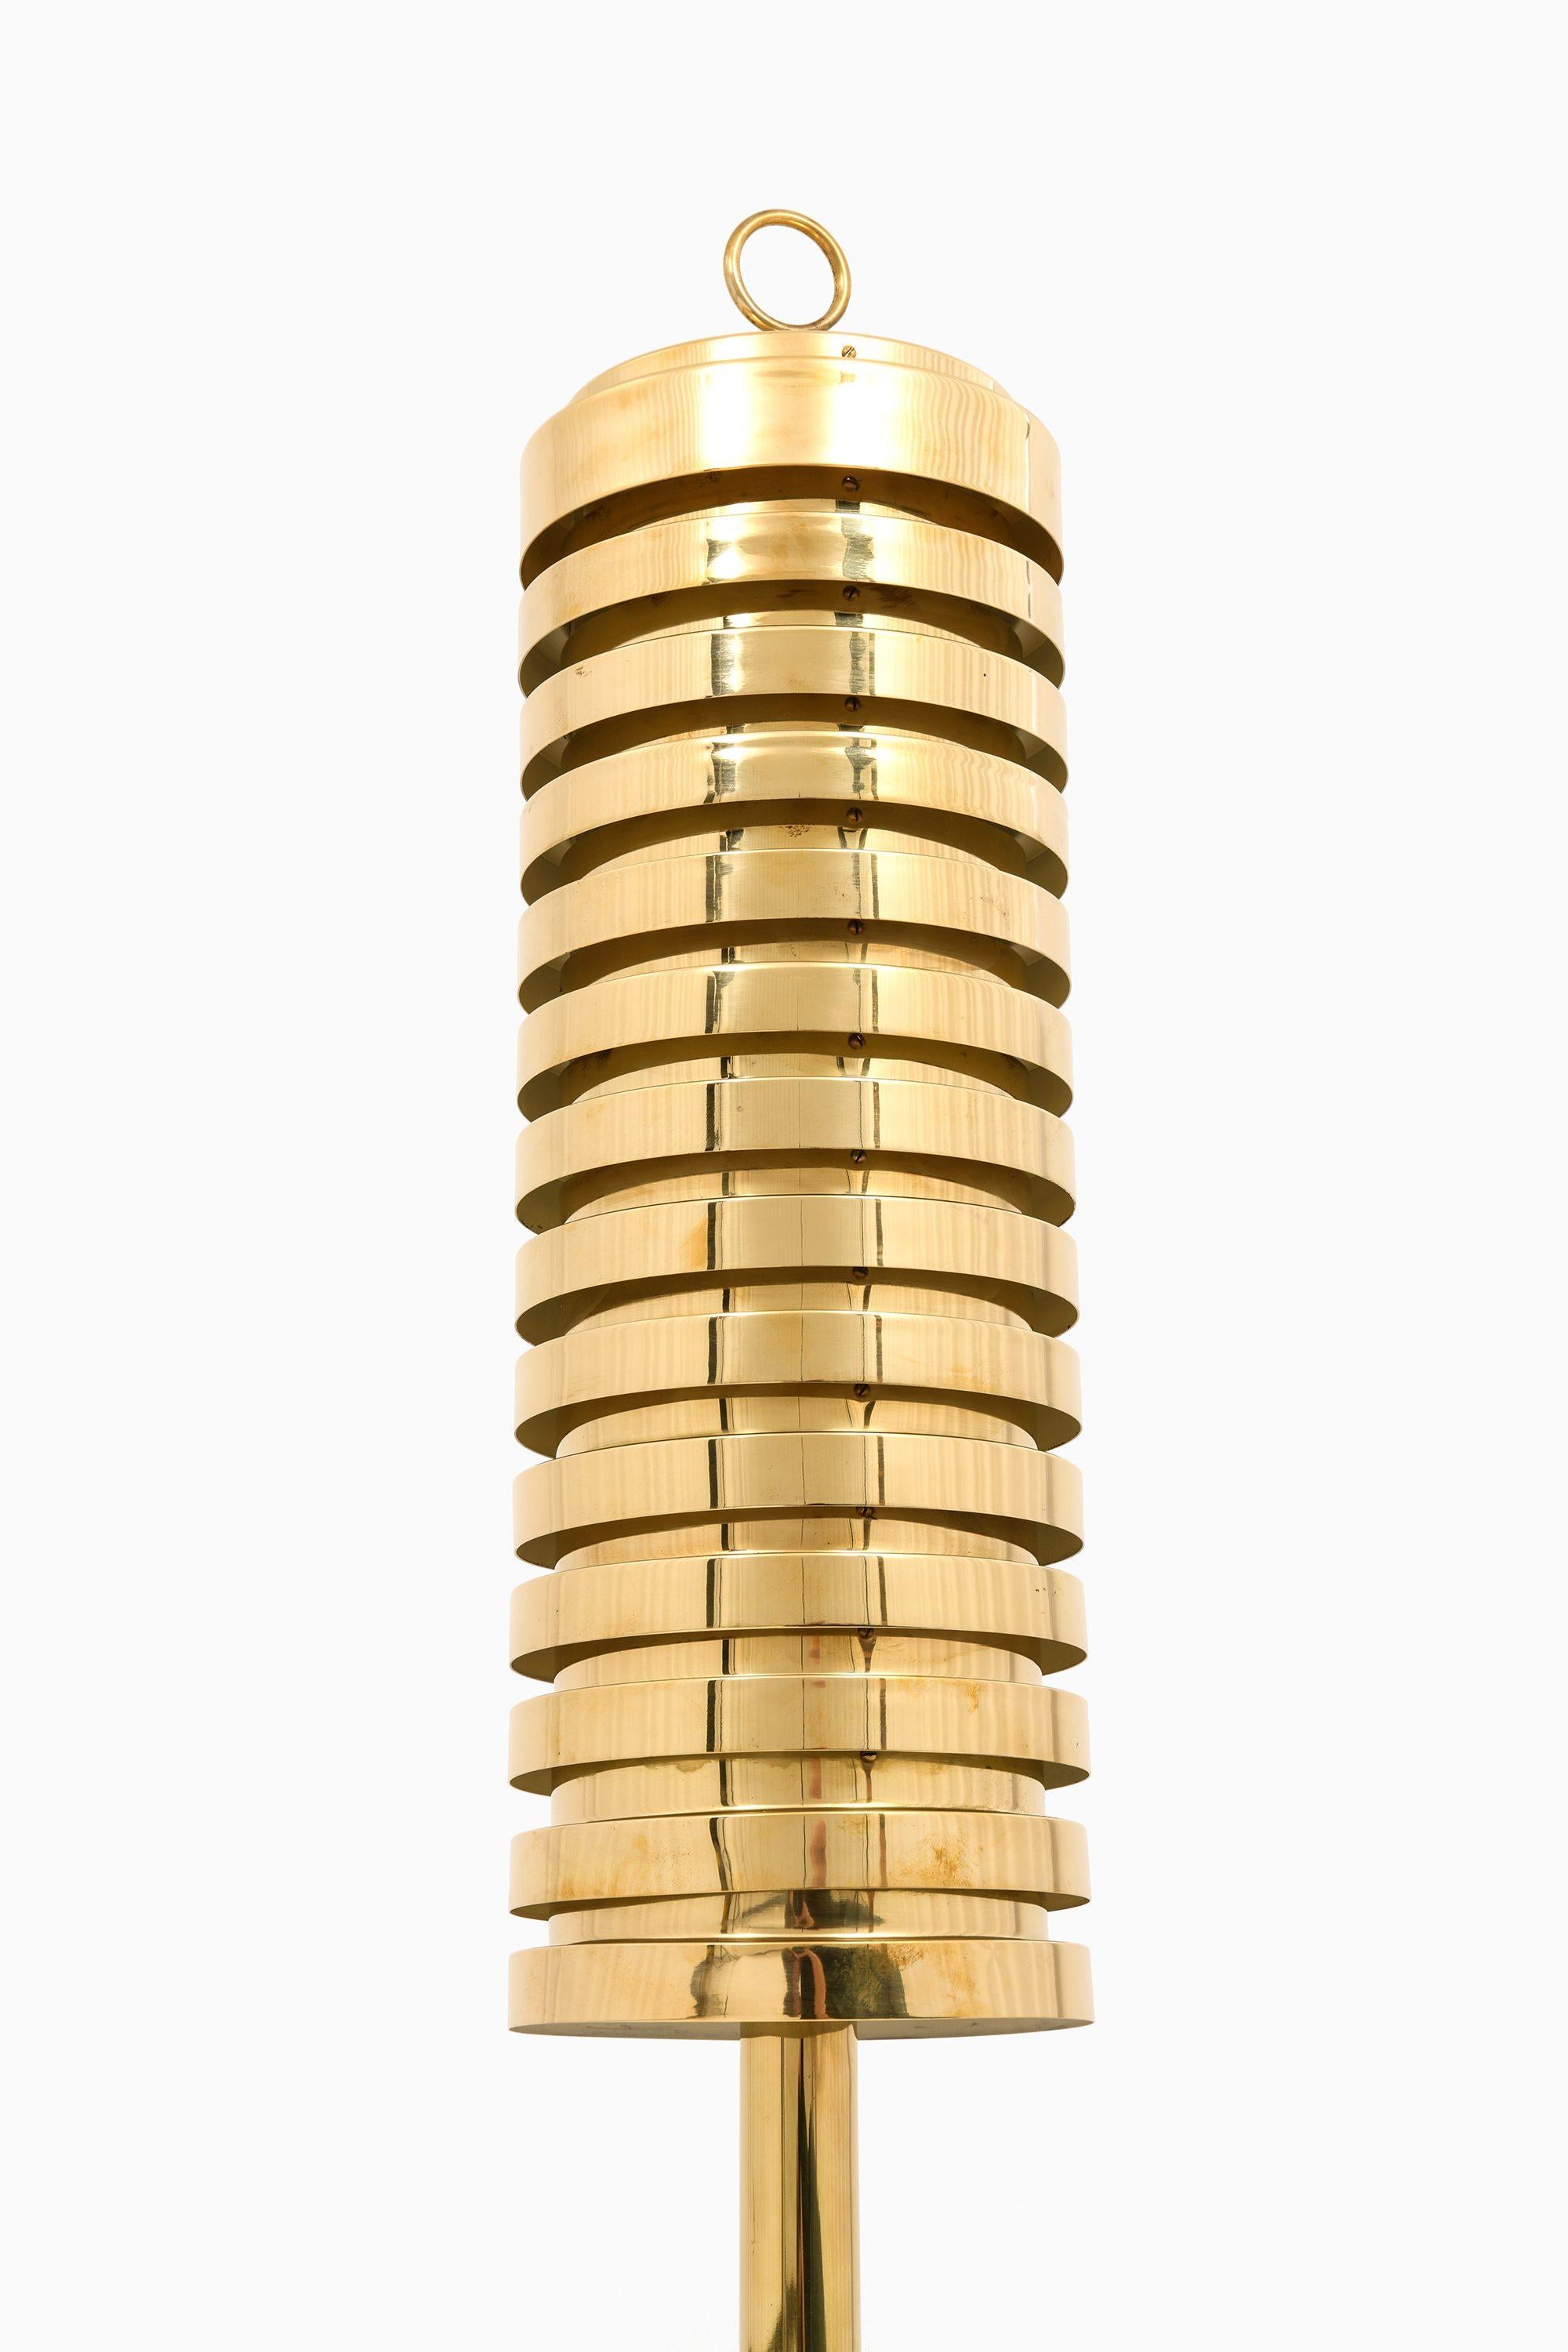 20th Century Floor Lamp in Brass by Hans-Agne Jakobsson, 1950's For Sale